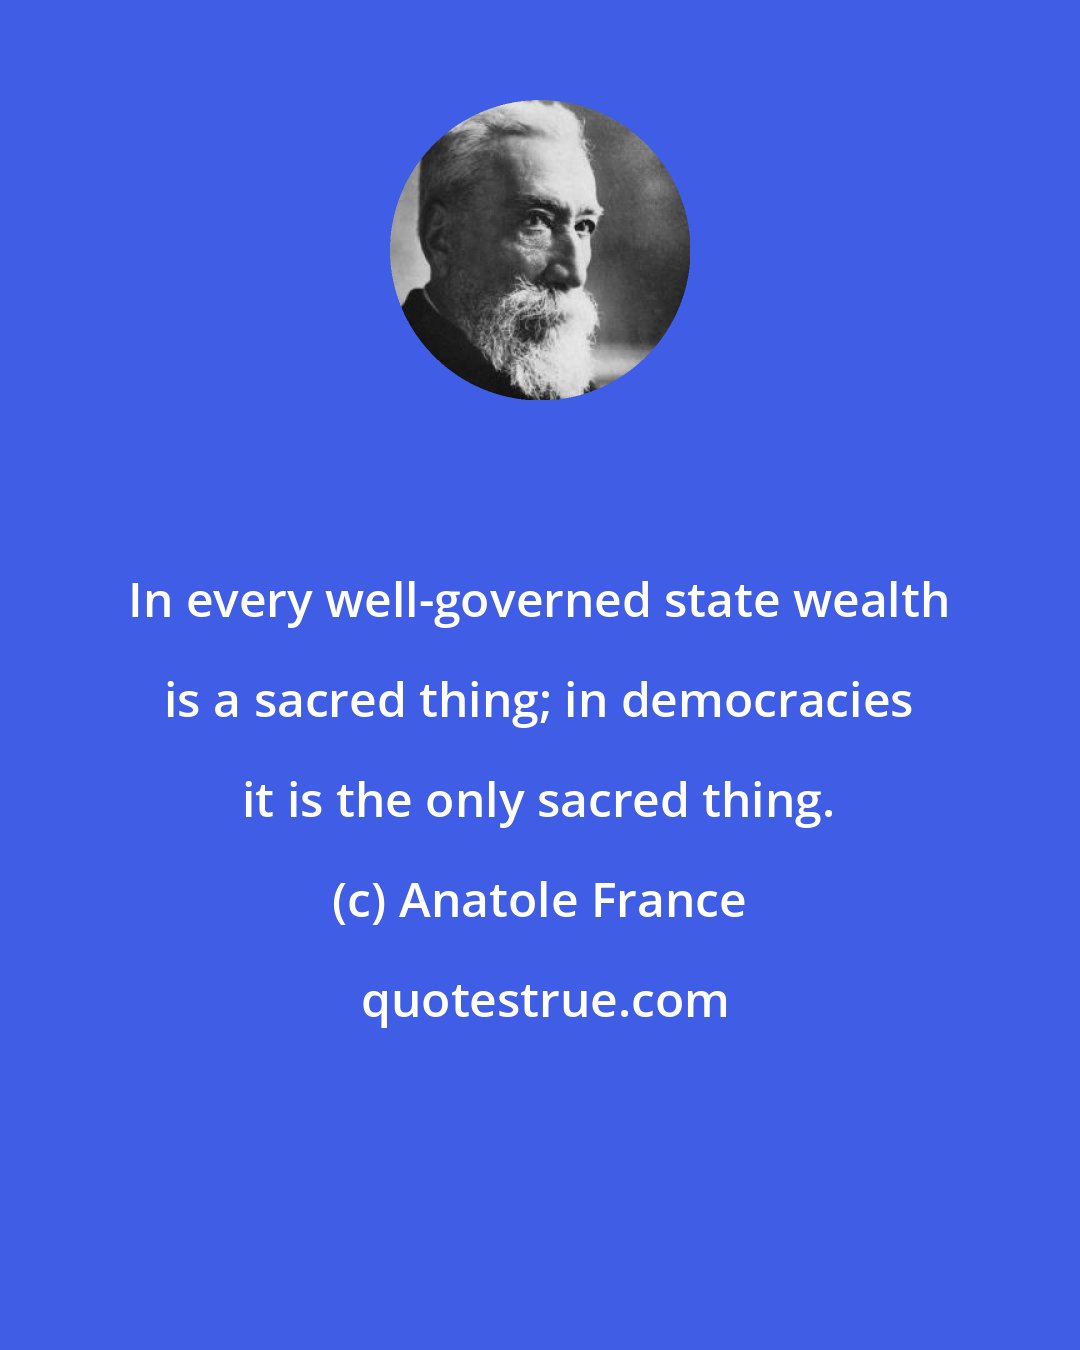 Anatole France: In every well-governed state wealth is a sacred thing; in democracies it is the only sacred thing.